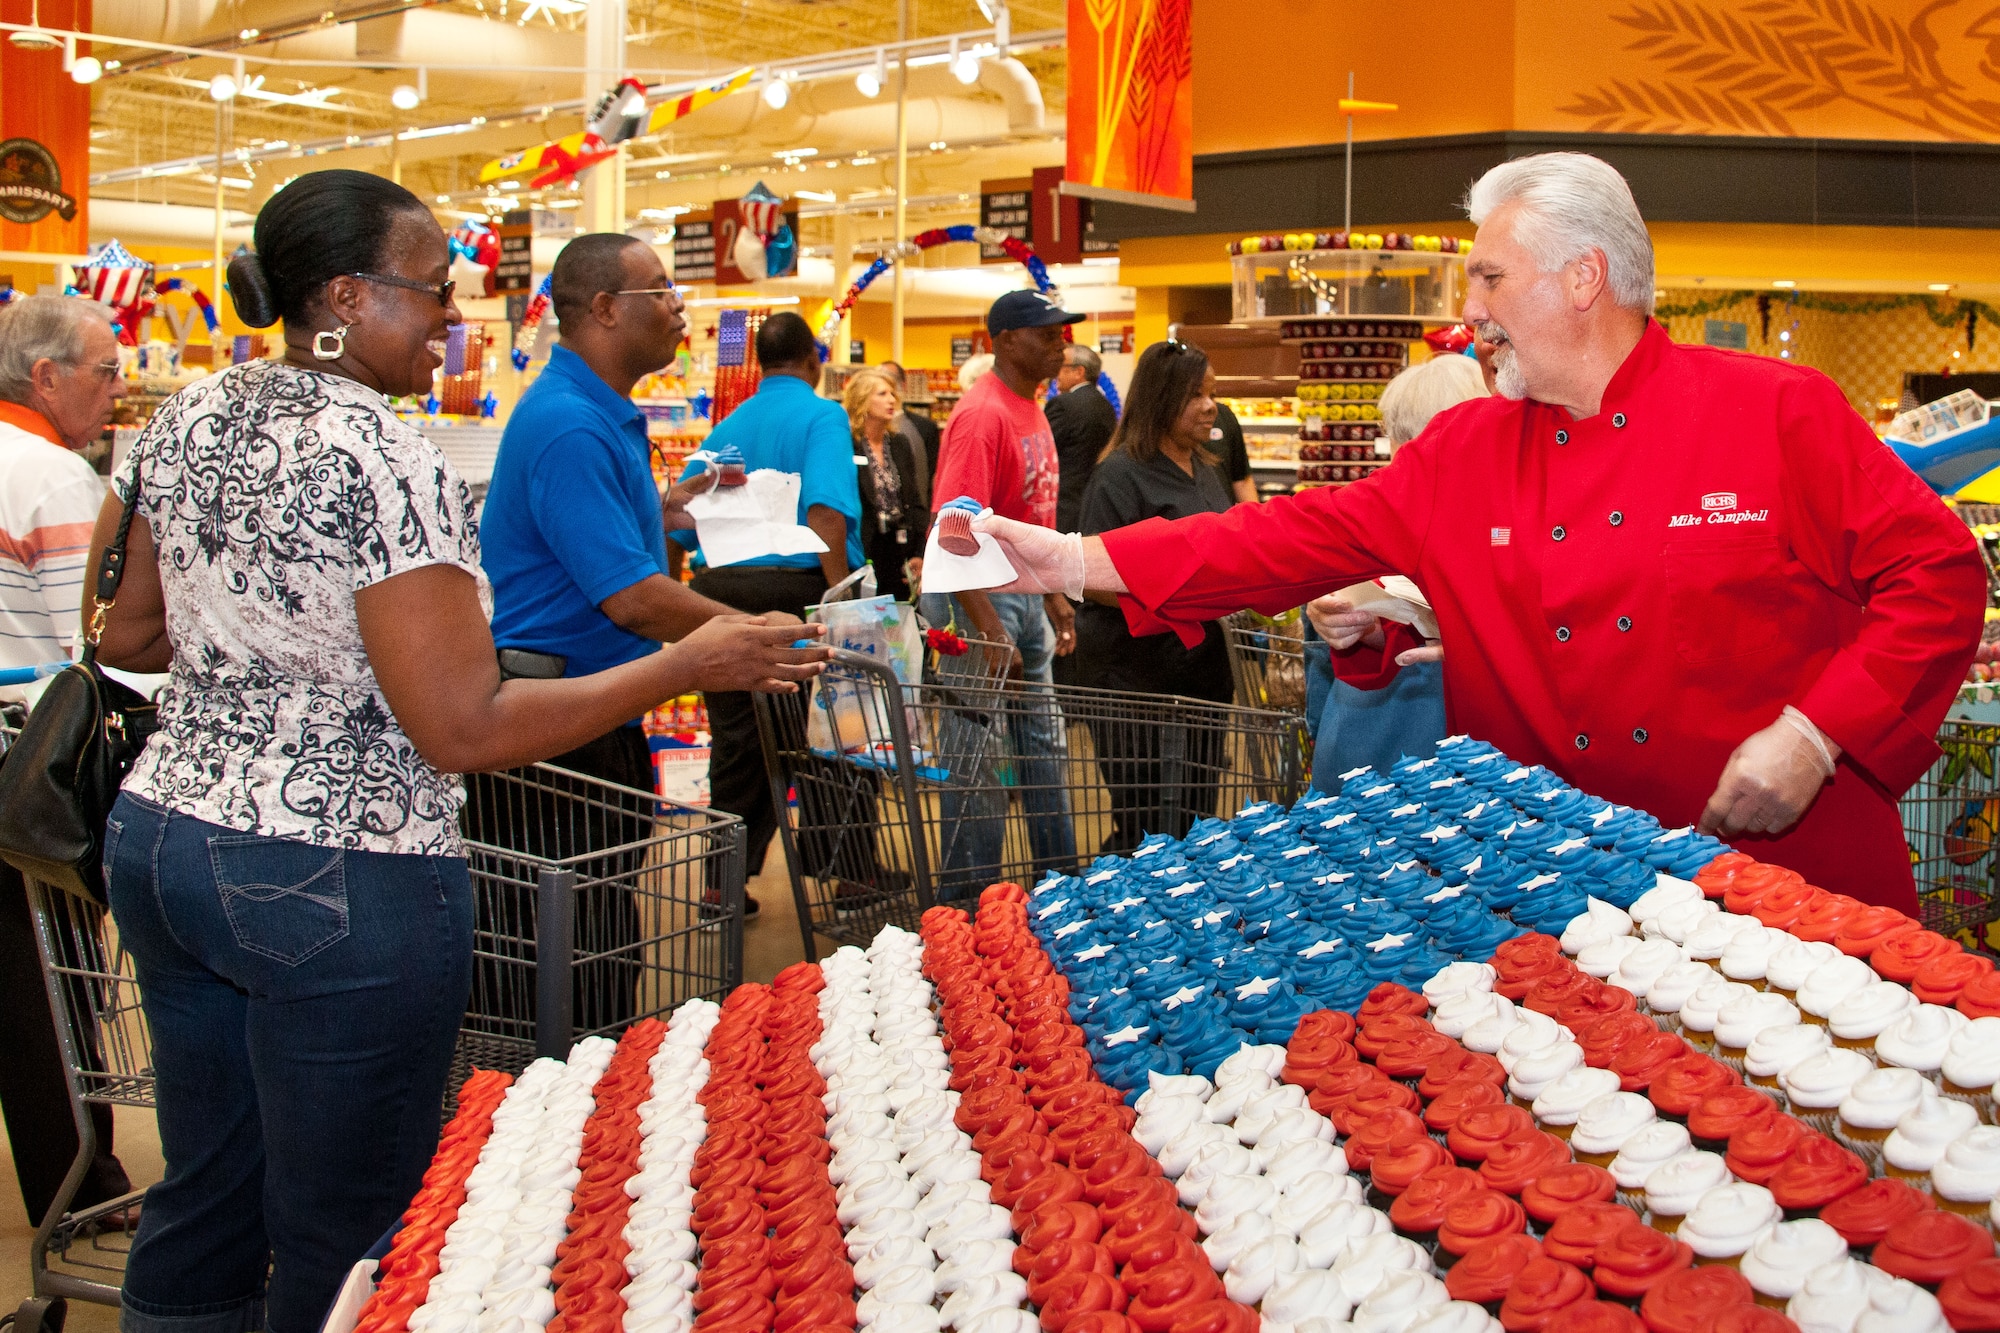 A Gunter-Annex commissary worker hands cupcakes out to customers at the store’s grand opening Aug. 5, 2014. The commissary was approximately a year in the making and boasts a larger more energy efficient store than the previous commissary, which was built in 1974. (U.S. Air Force photo by Donna L. Burnett)